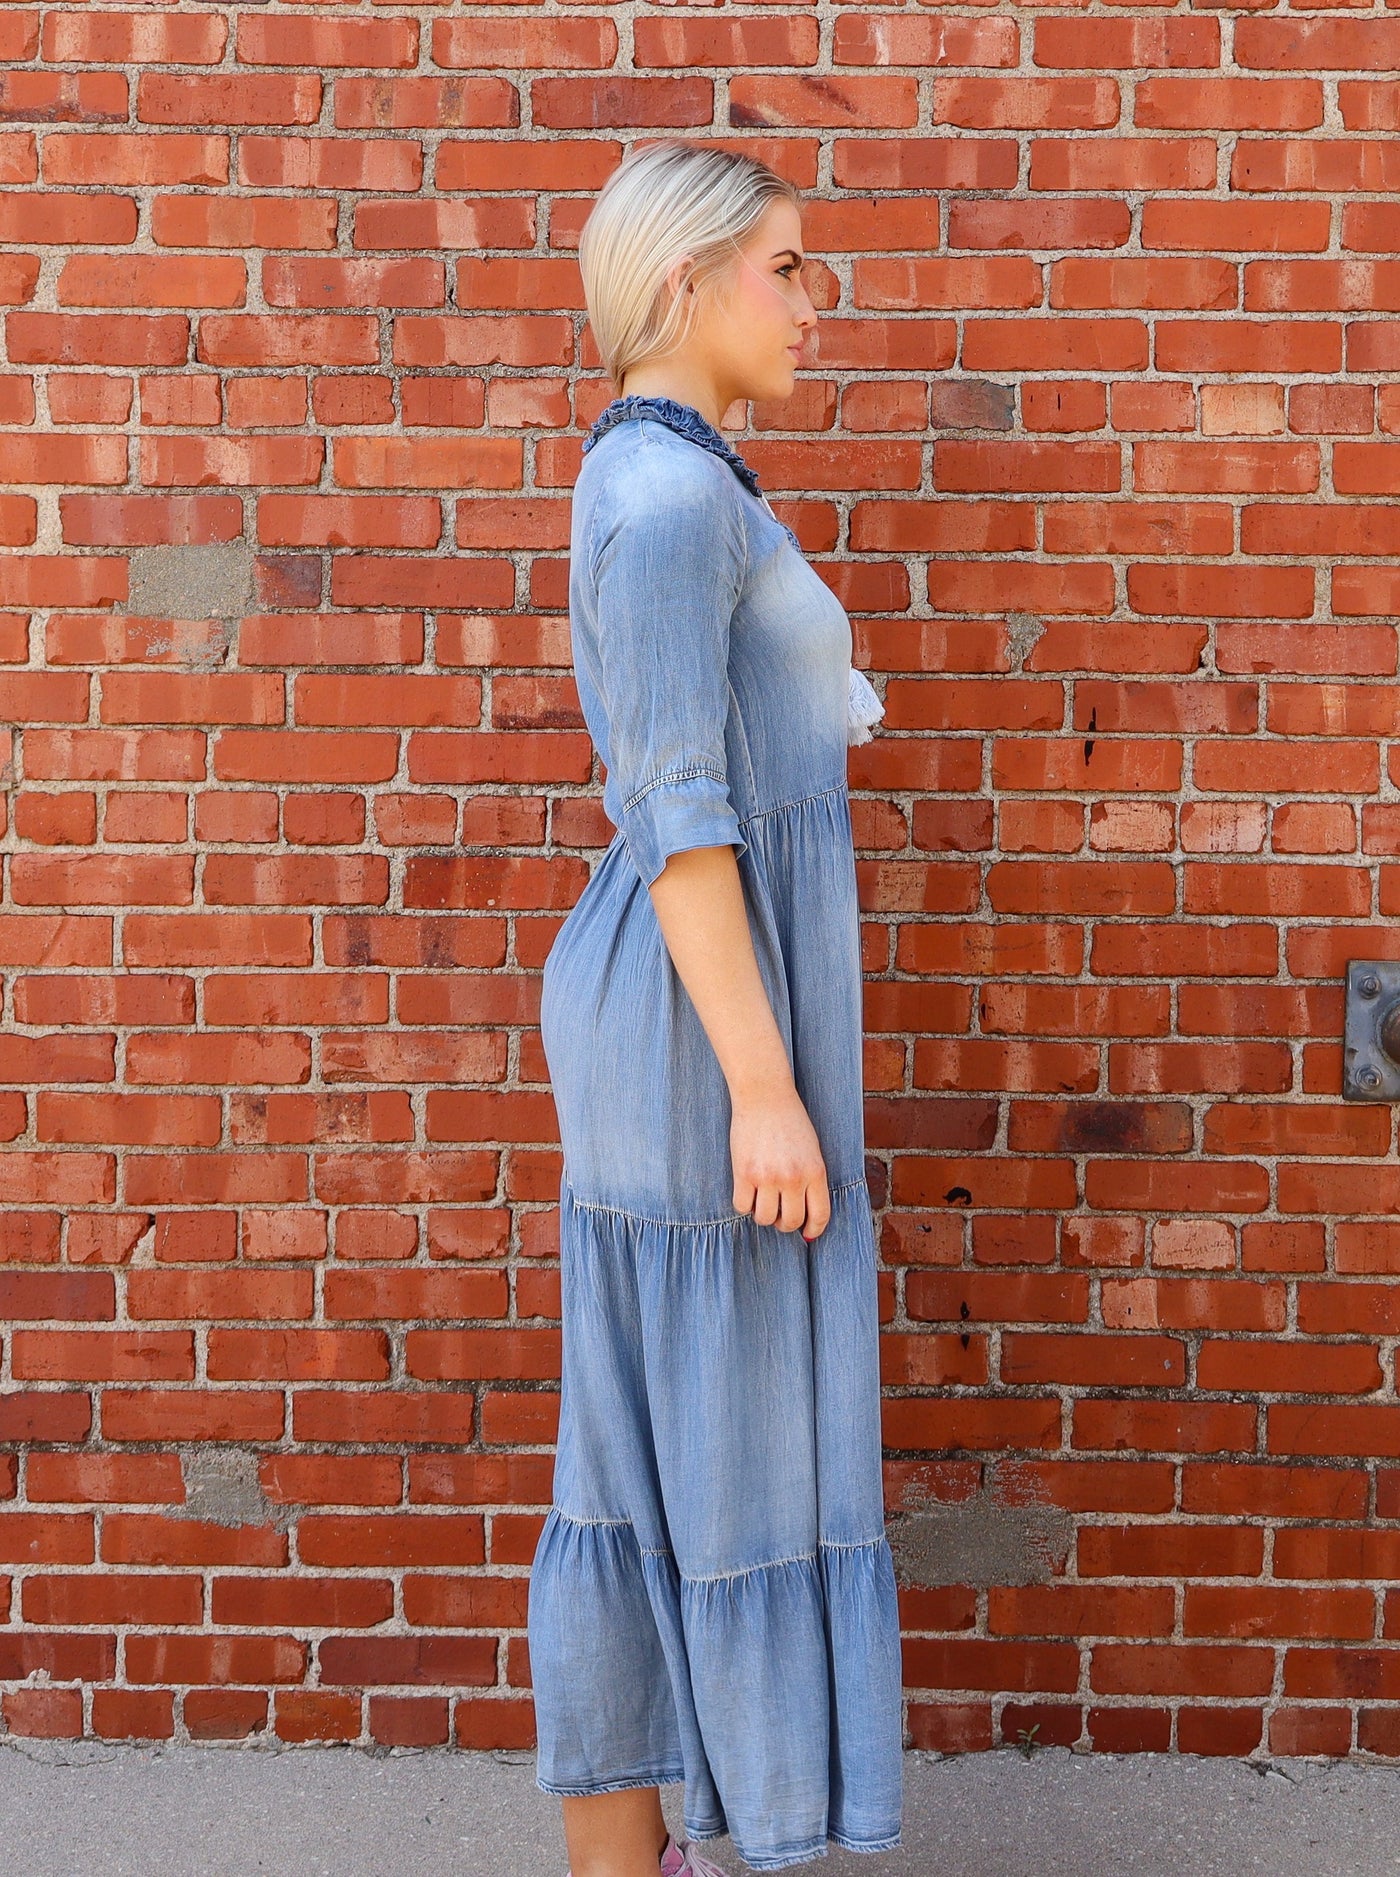 Model is wearing a denim 3/4th sleeve maxi dress with tiered detail, a split neck with a tie at neck, and ruffling at neckline. Worn with converse.